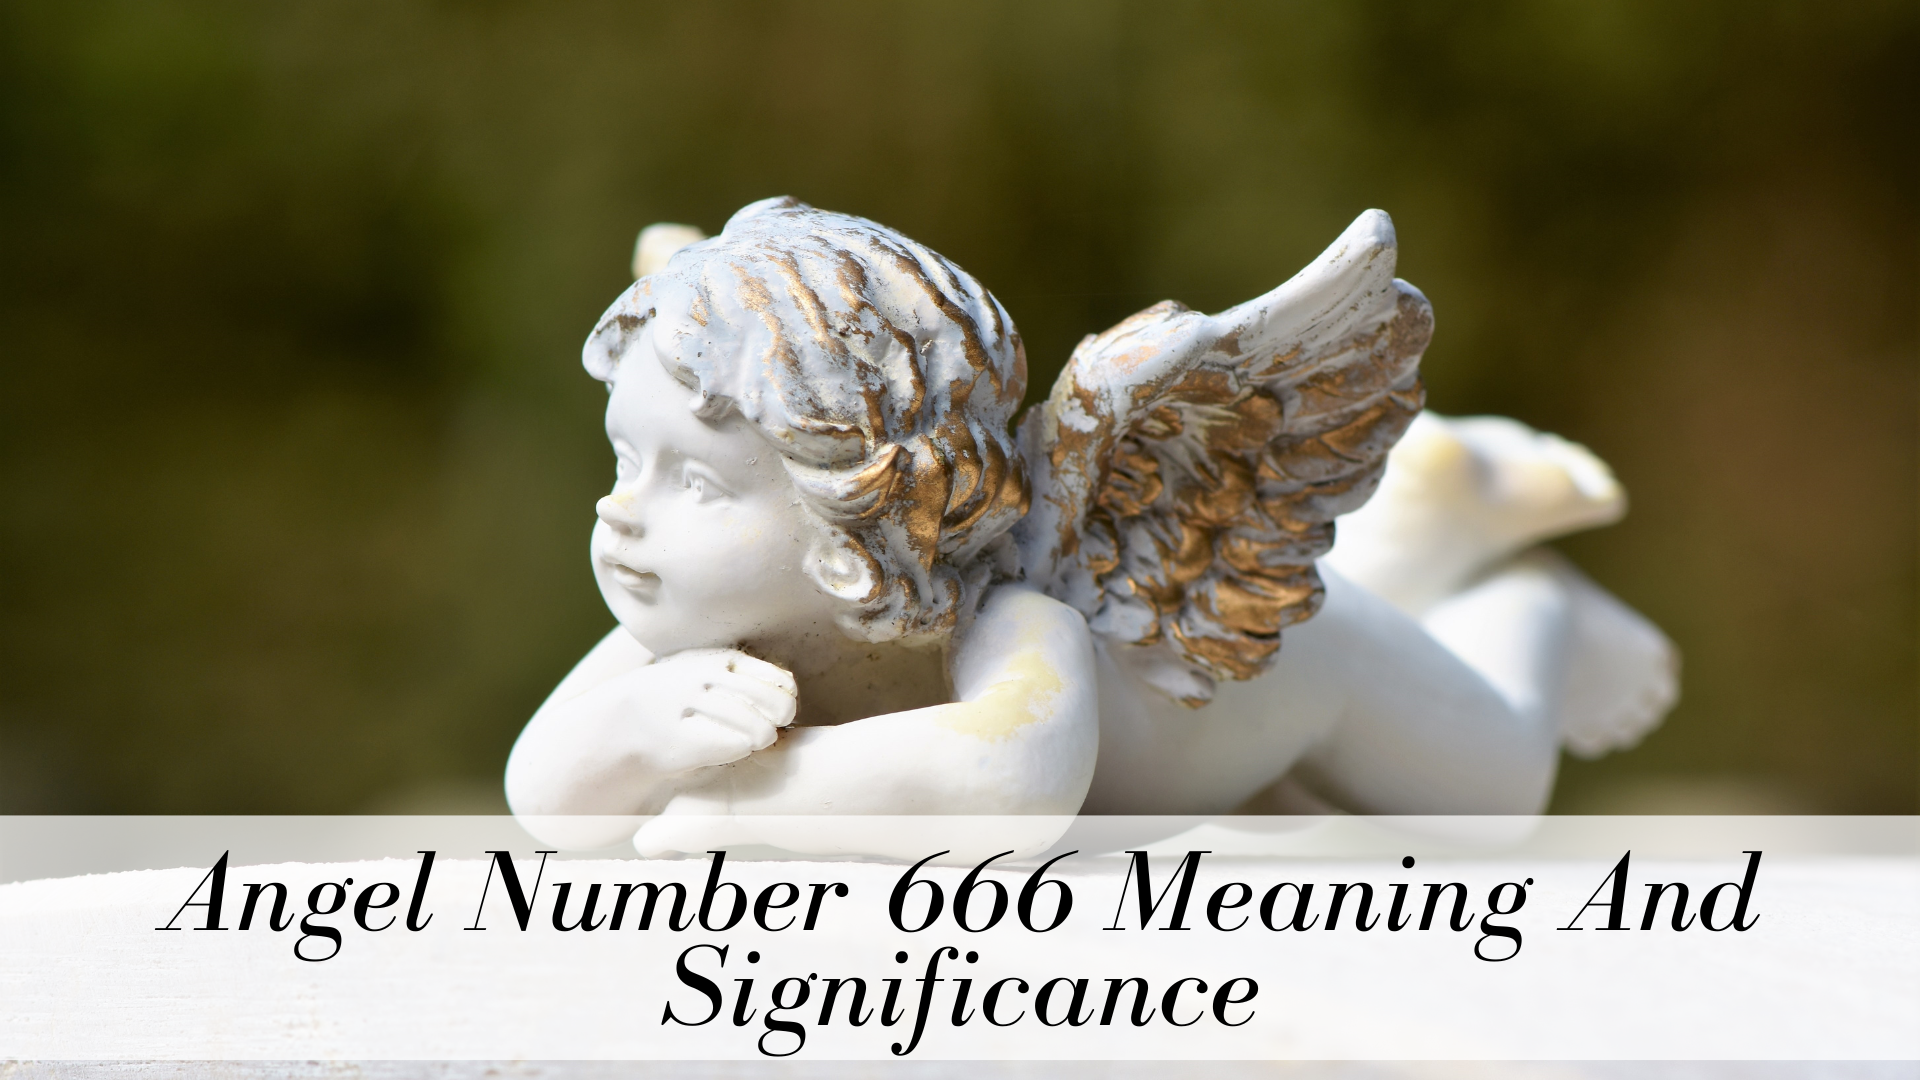 An angel figurine with words Angel Number 666 Meaning And Significance